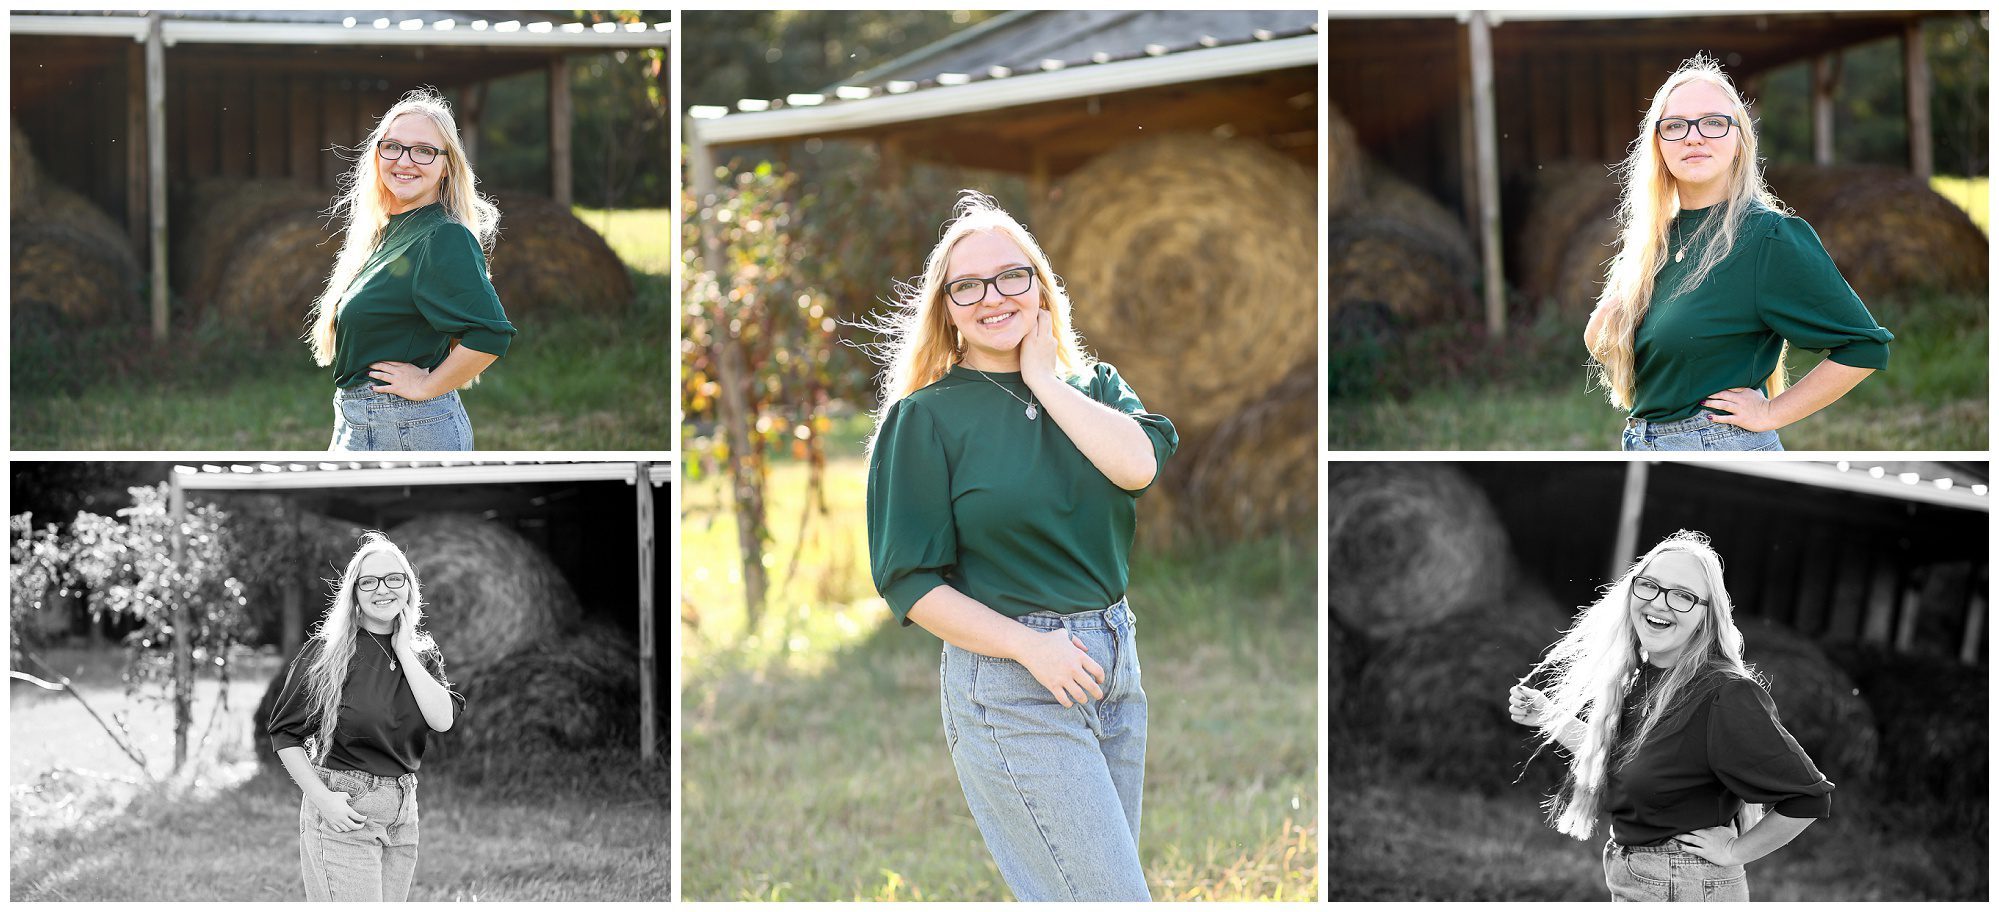 Fluvanna County High School Senior Portraits at Camp Westview on the James in Goochland photographer pictures charlottesville cville FCHS class of 2020